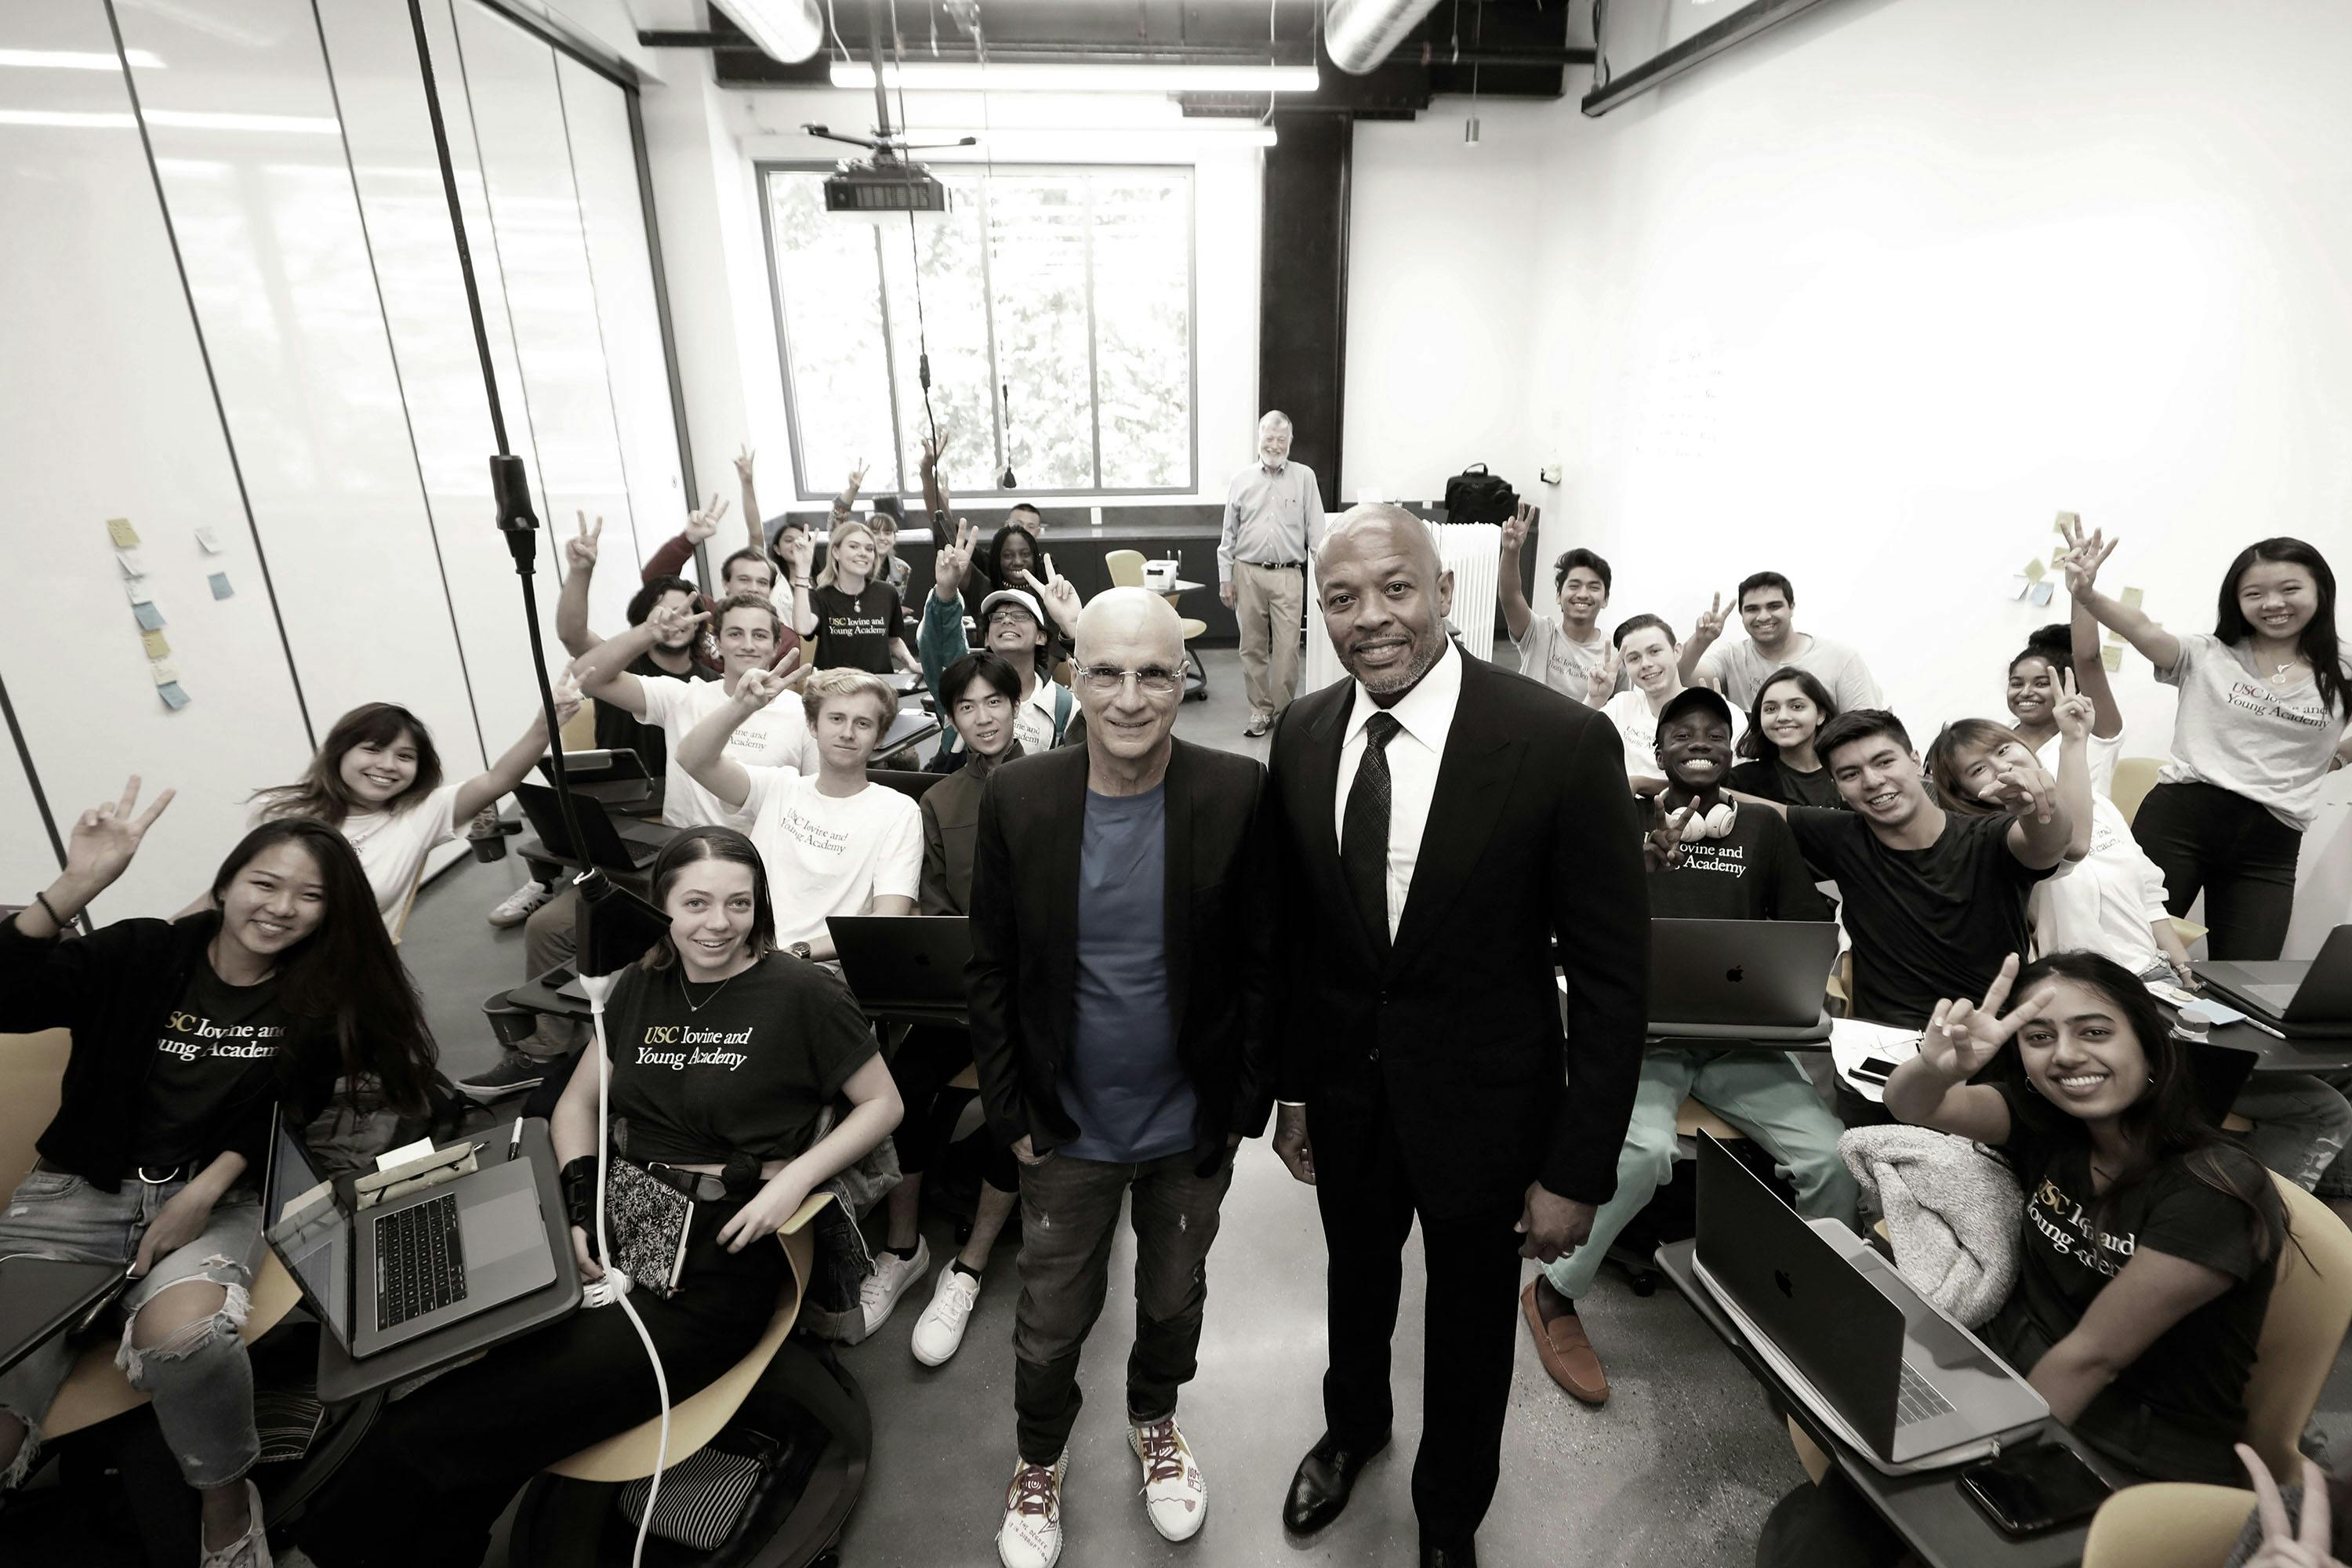 The Founders Jimmy Iovine and Andre “Dr. Dre” Young take a photo with a group of students